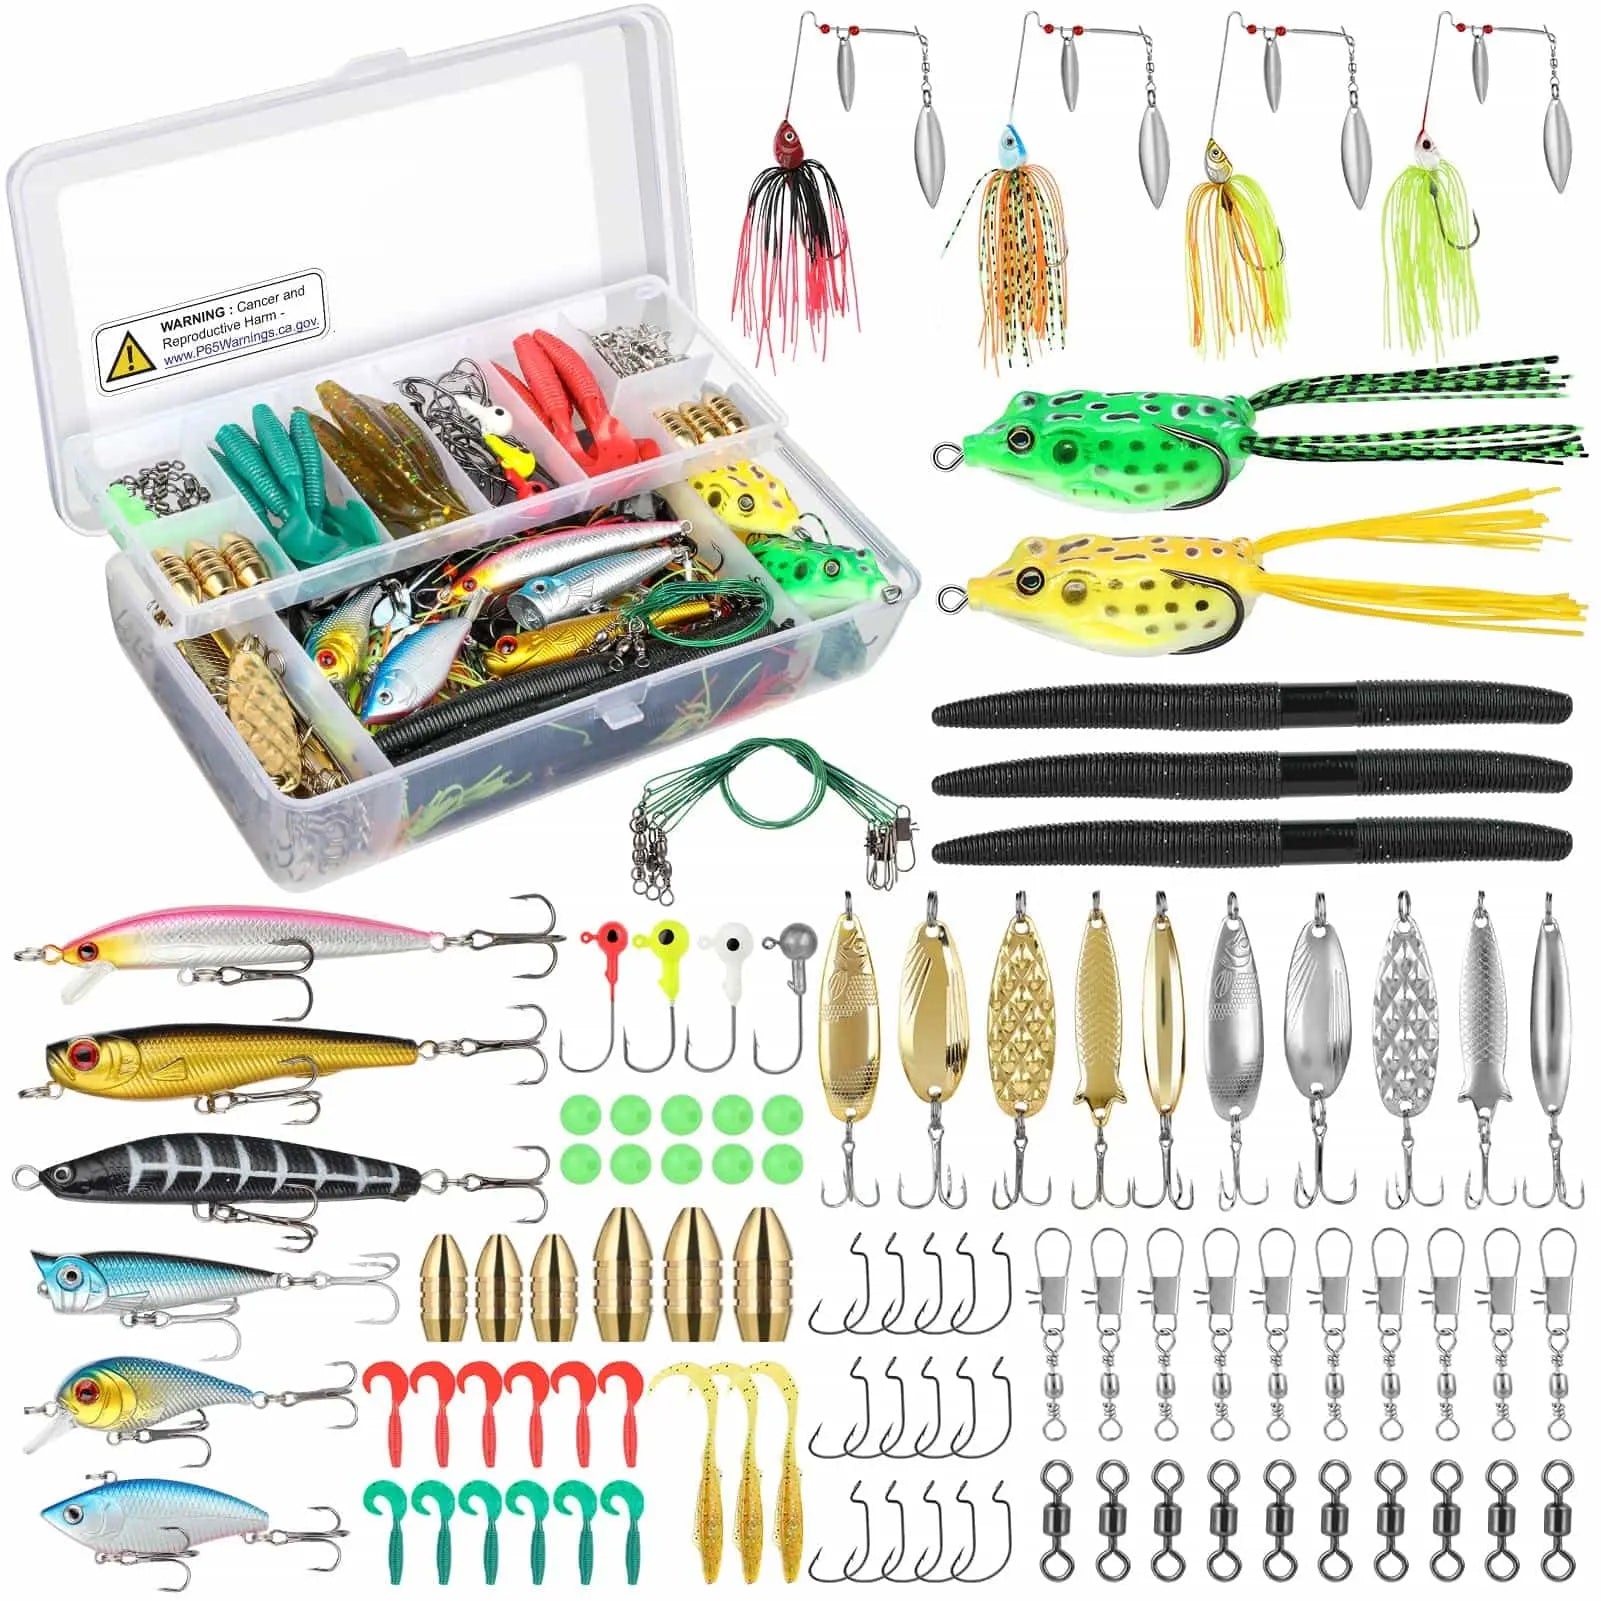  322-Piece Bass Fishing Lures Accessories Kit with